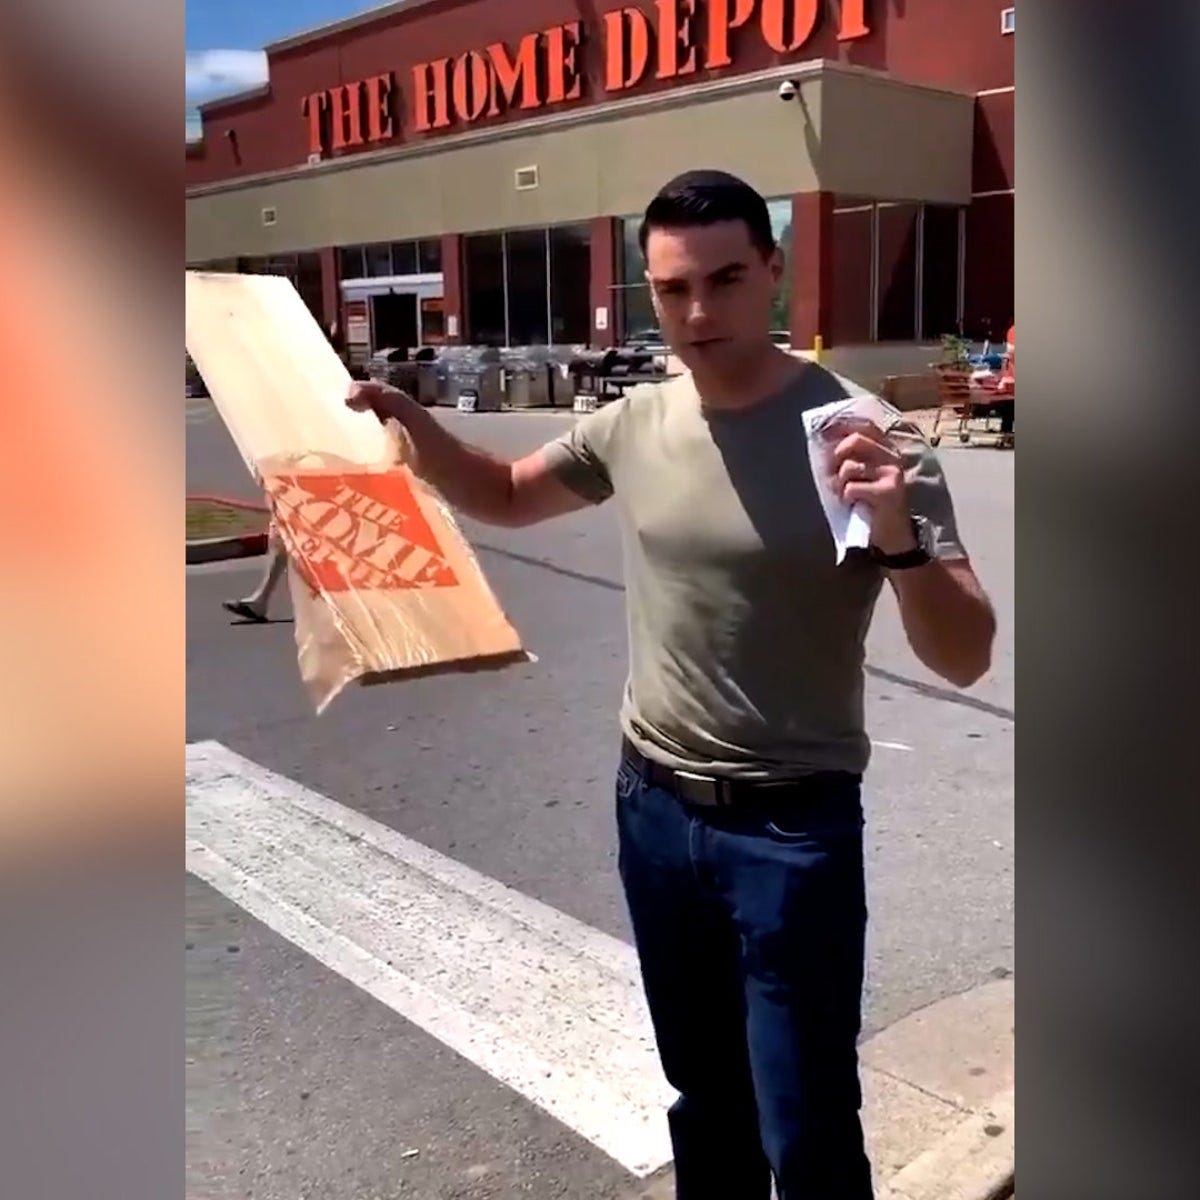 Ben Shapiro ridiculed for buying a plank of wood in support of Home Depot |  News | Independent TV